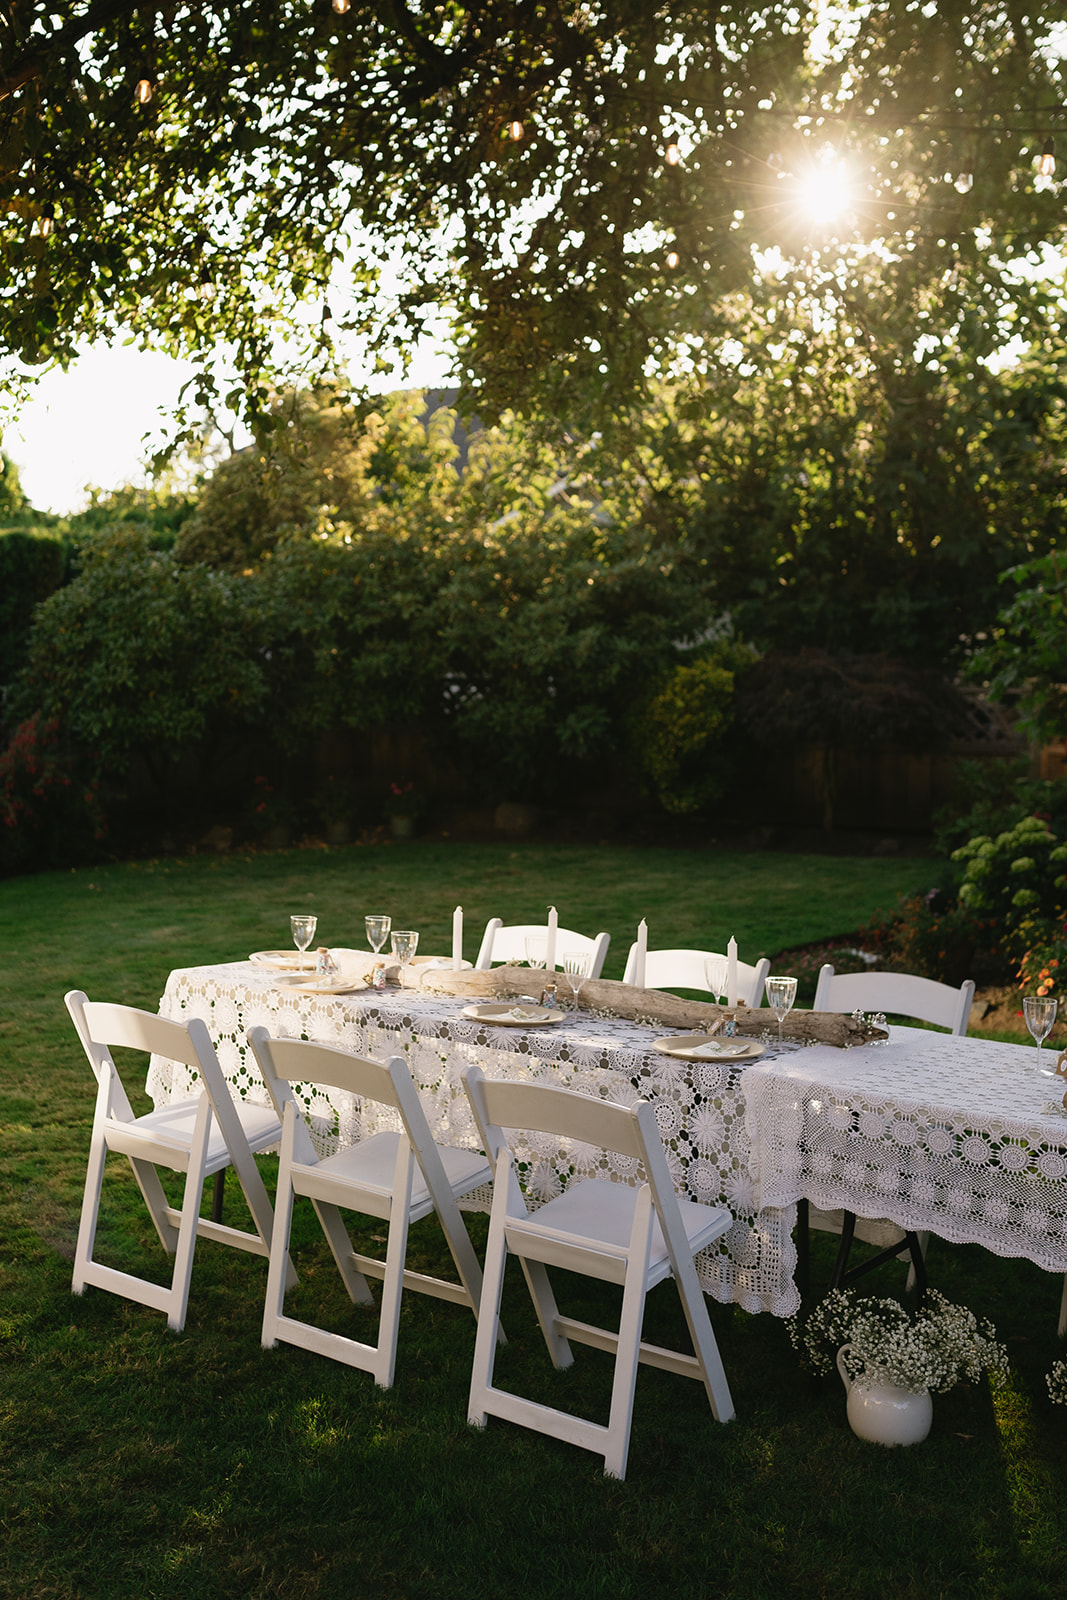 Dinner table set beautifully at backyard wedding in Victoria, BC